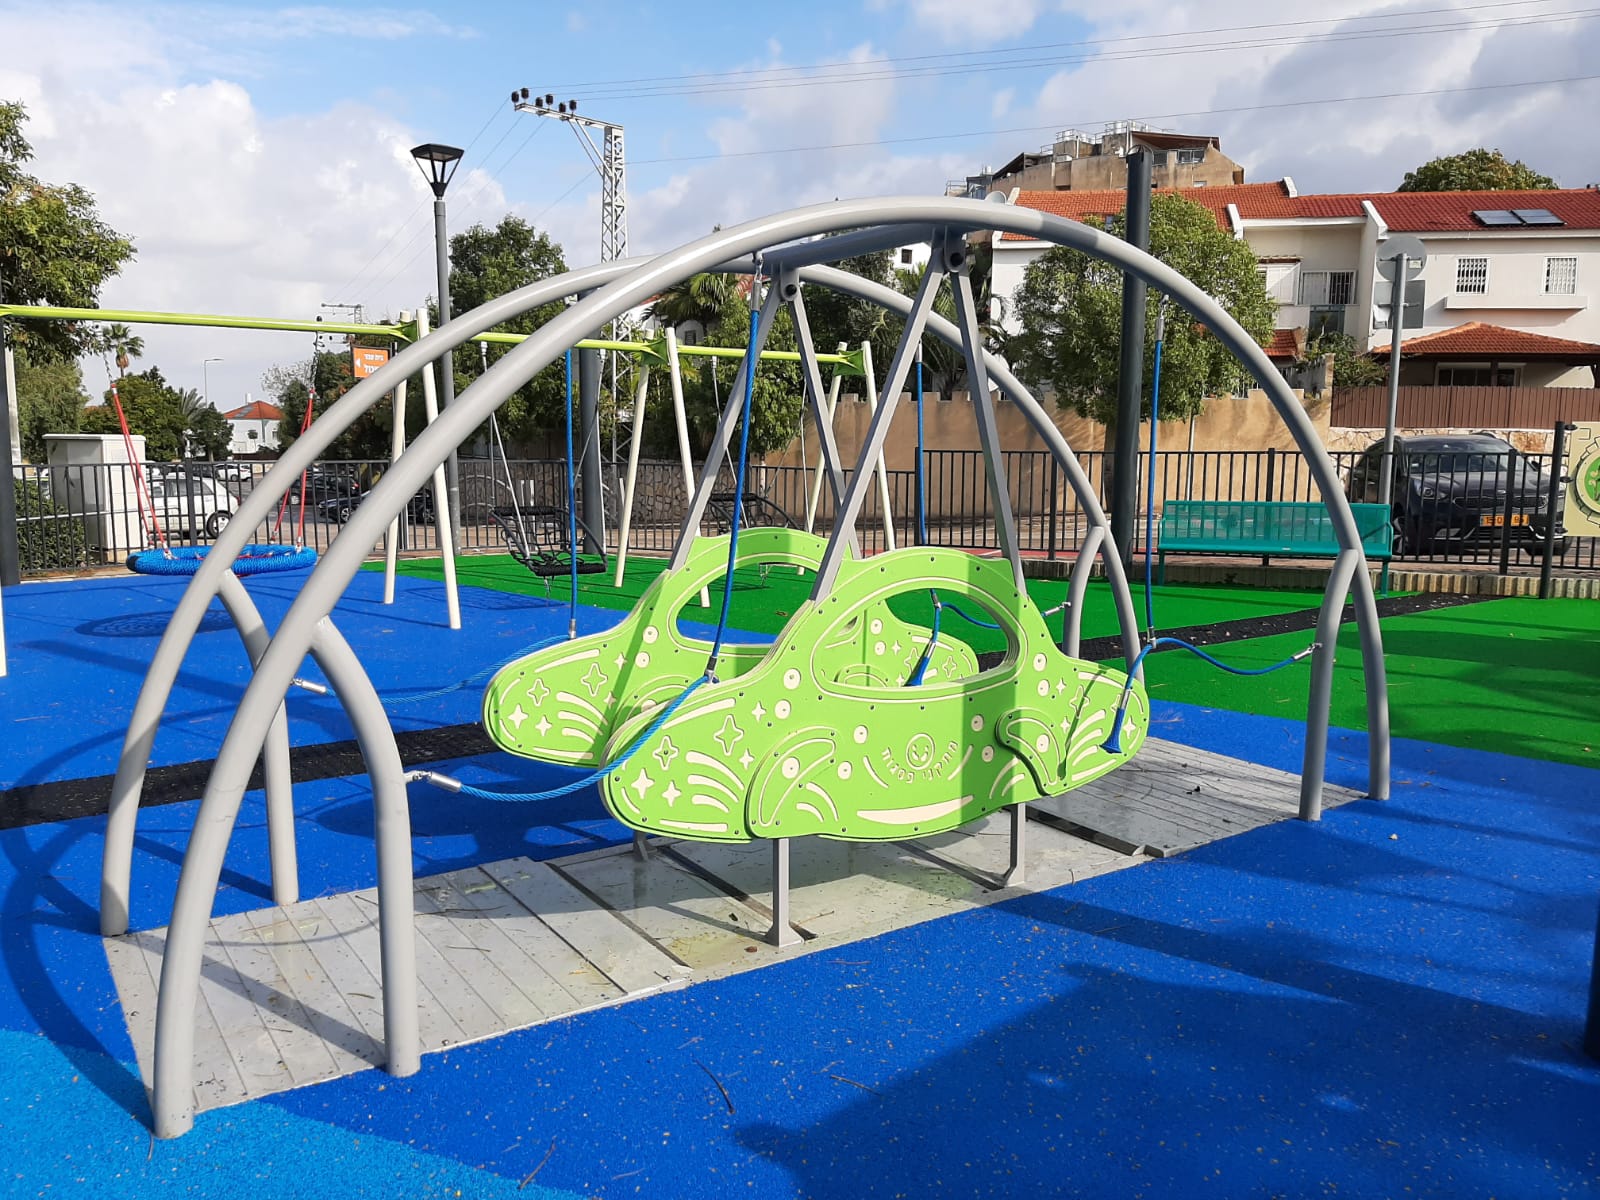 Psagot-Commercial-Playgrounds-Inclusive-Space-Swing-2443-Build